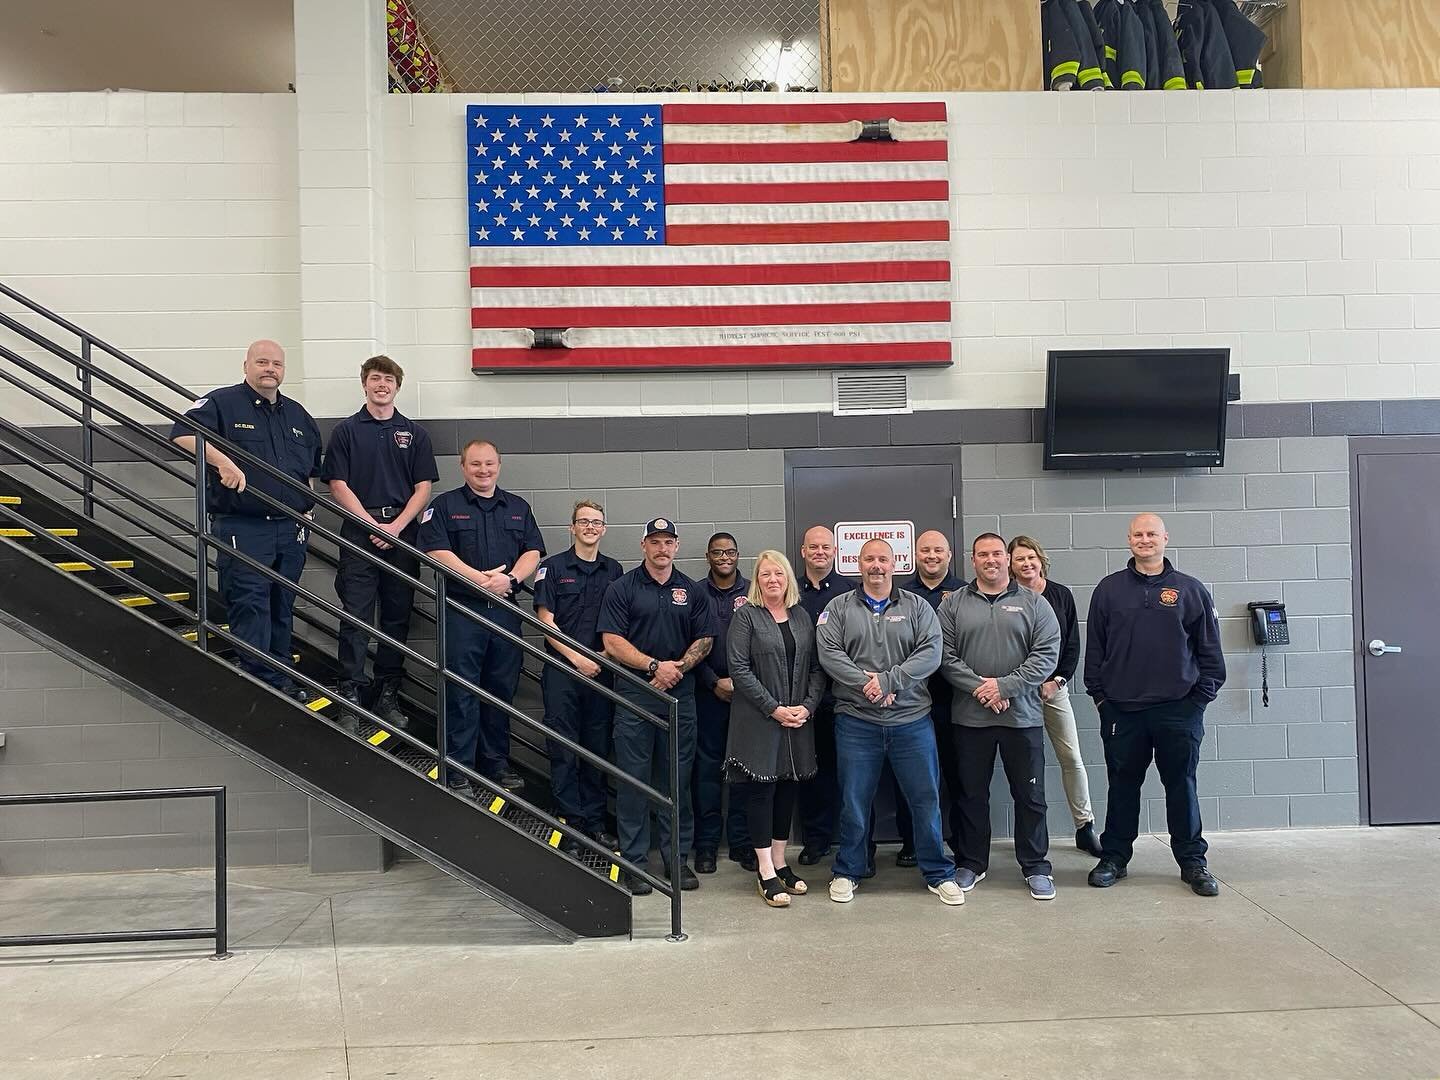 April 28th, 2022 the world was getting back to normal from the effects of the pandemic and Brotherhood was getting rolling with becoming something special.  Our Brethren in the fire service at Vernon Township, located just to the south of Brotherhood